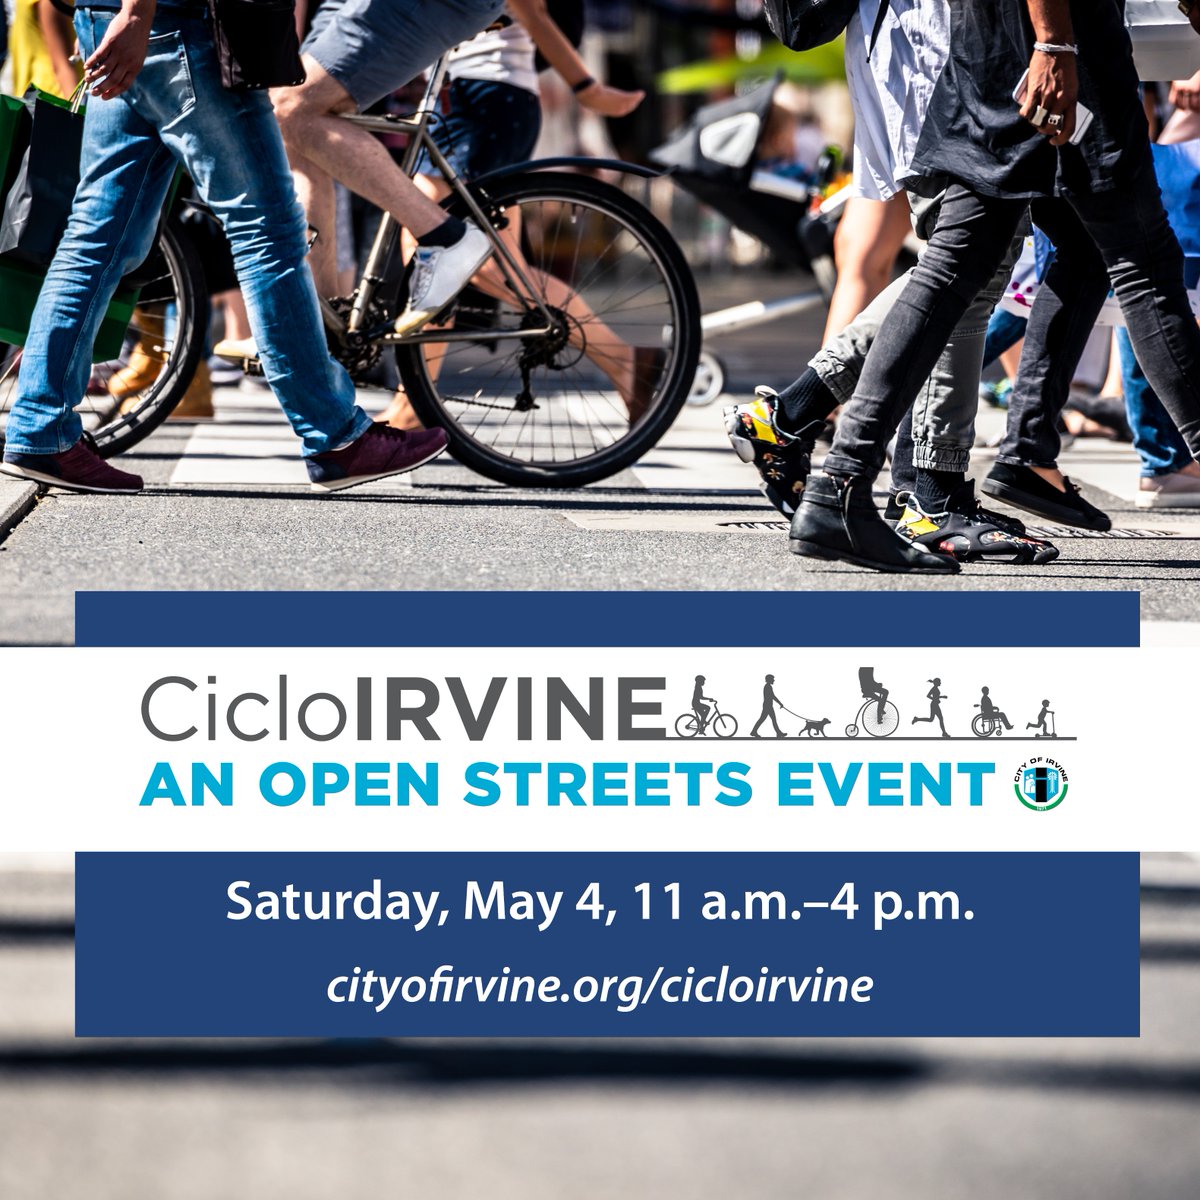 Join us later today at CicloIrvine, our first-ever Open Streets Event. The fun kicks off at 11 a.m. with nearly two miles of streets closed to cars along Barranca Parkway and Harvard Avenue.

ℹ️ cityofirvine.org/cicloirvine 

#CicloIrvine #OpenStreets